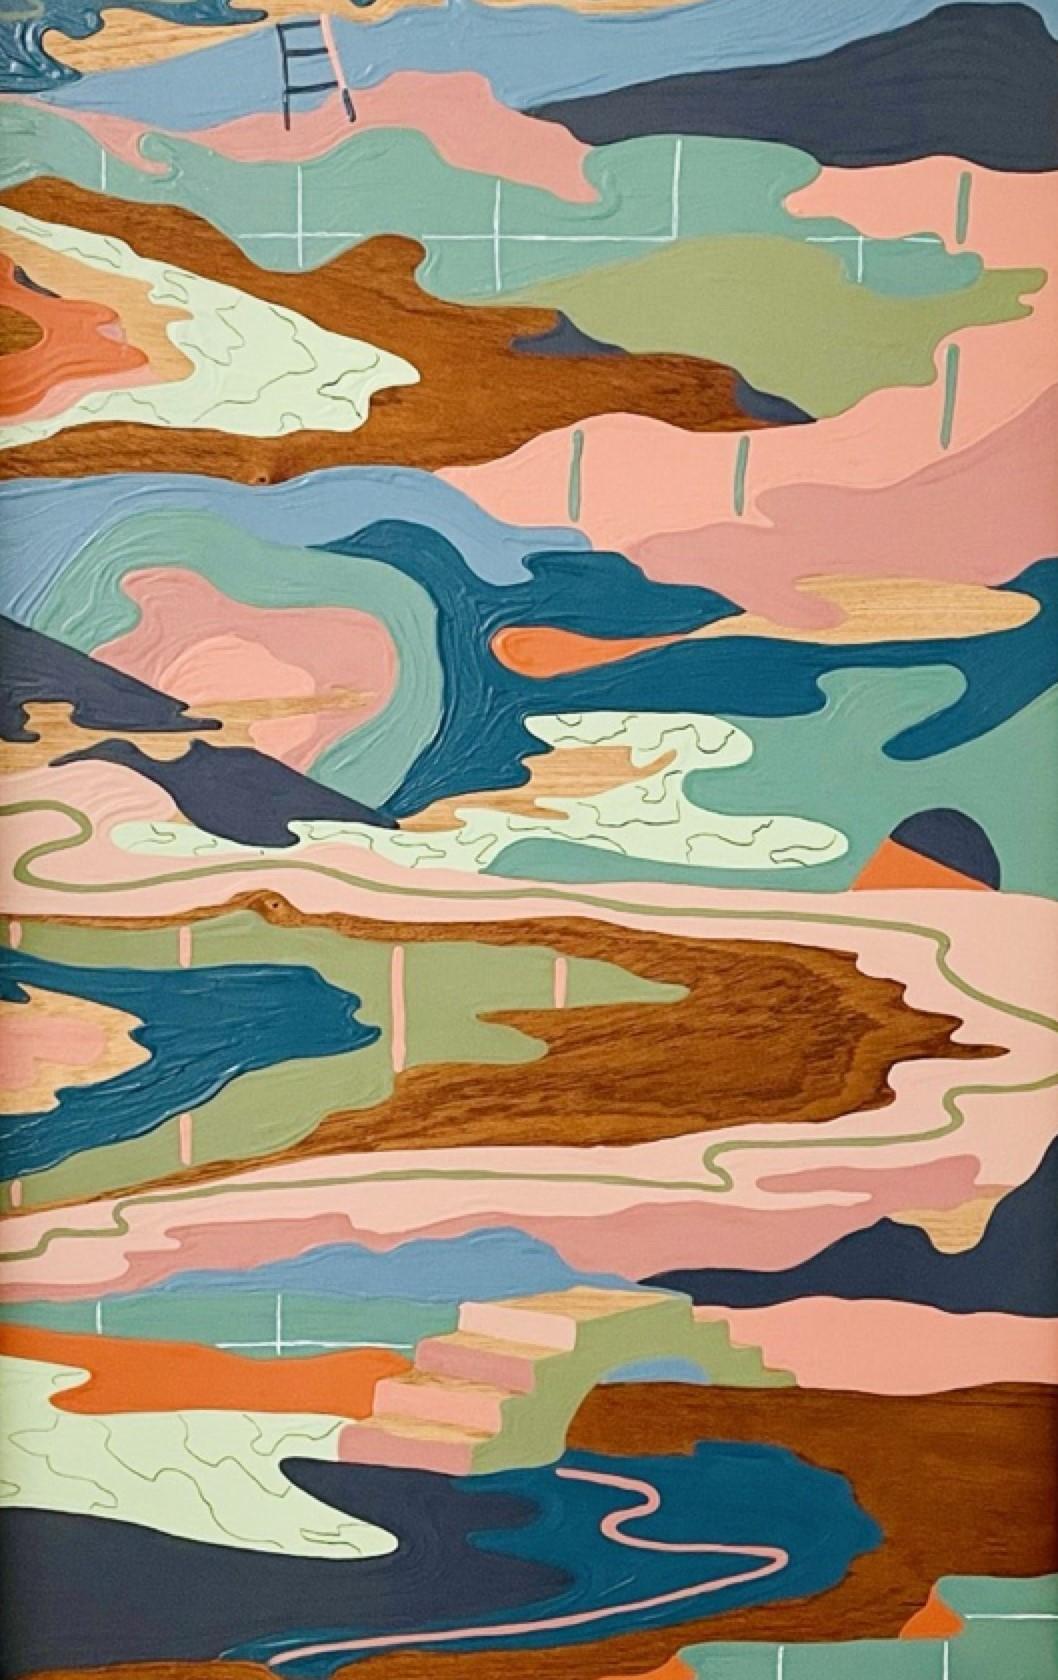 Contemporary colorful abstract landscape painting by New Jersey based artist Russ Rubin. The work features an otherworldly landscape winding in muted desert hues hung by the artist in a vintage decorative frame that beckons the viewer into Russ's